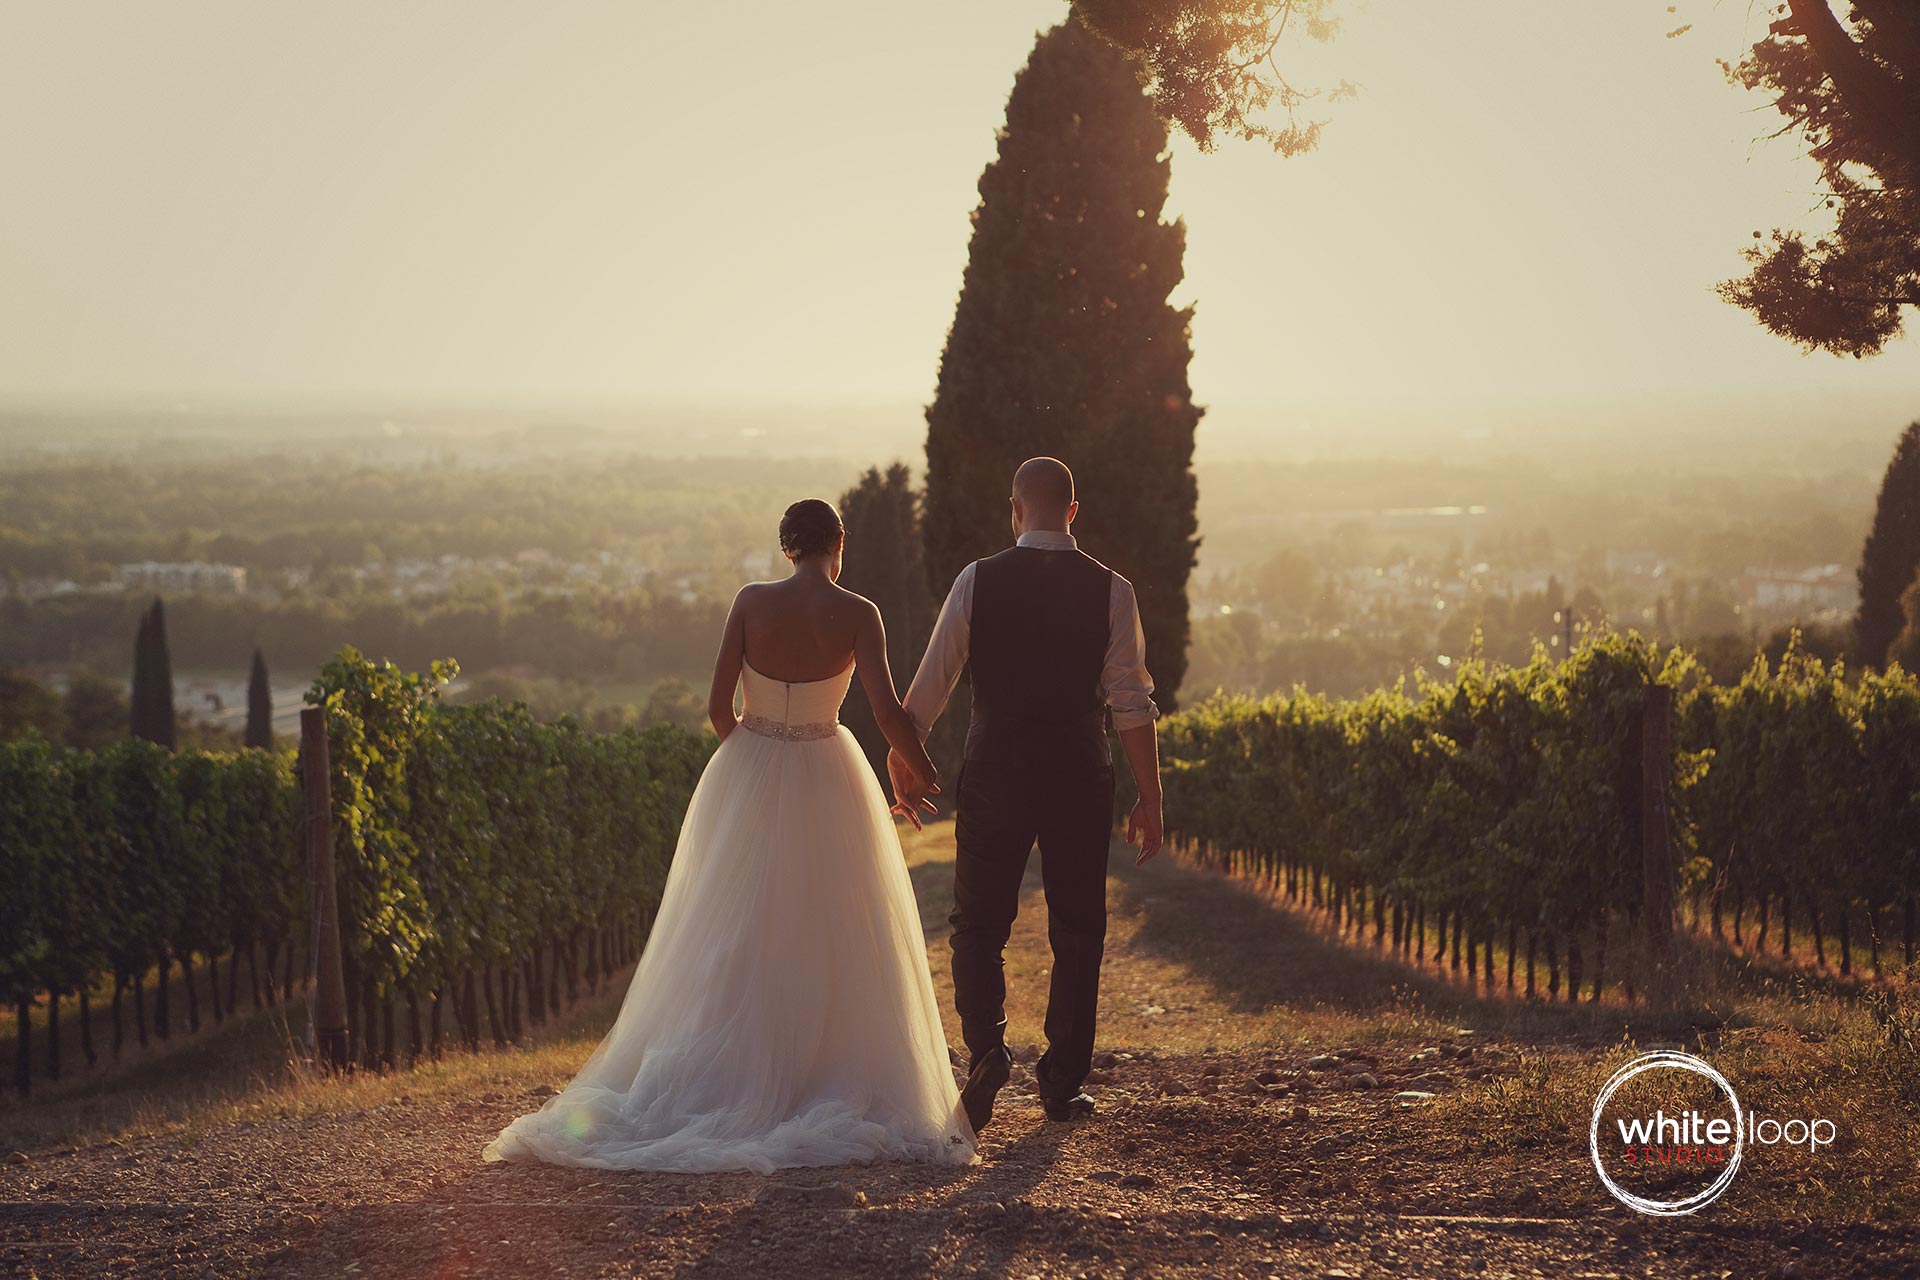 The bride and groom are holding each other hands while they are backlight in a North Italy grape field, the bride in the wedding dress and the groom in his suit.